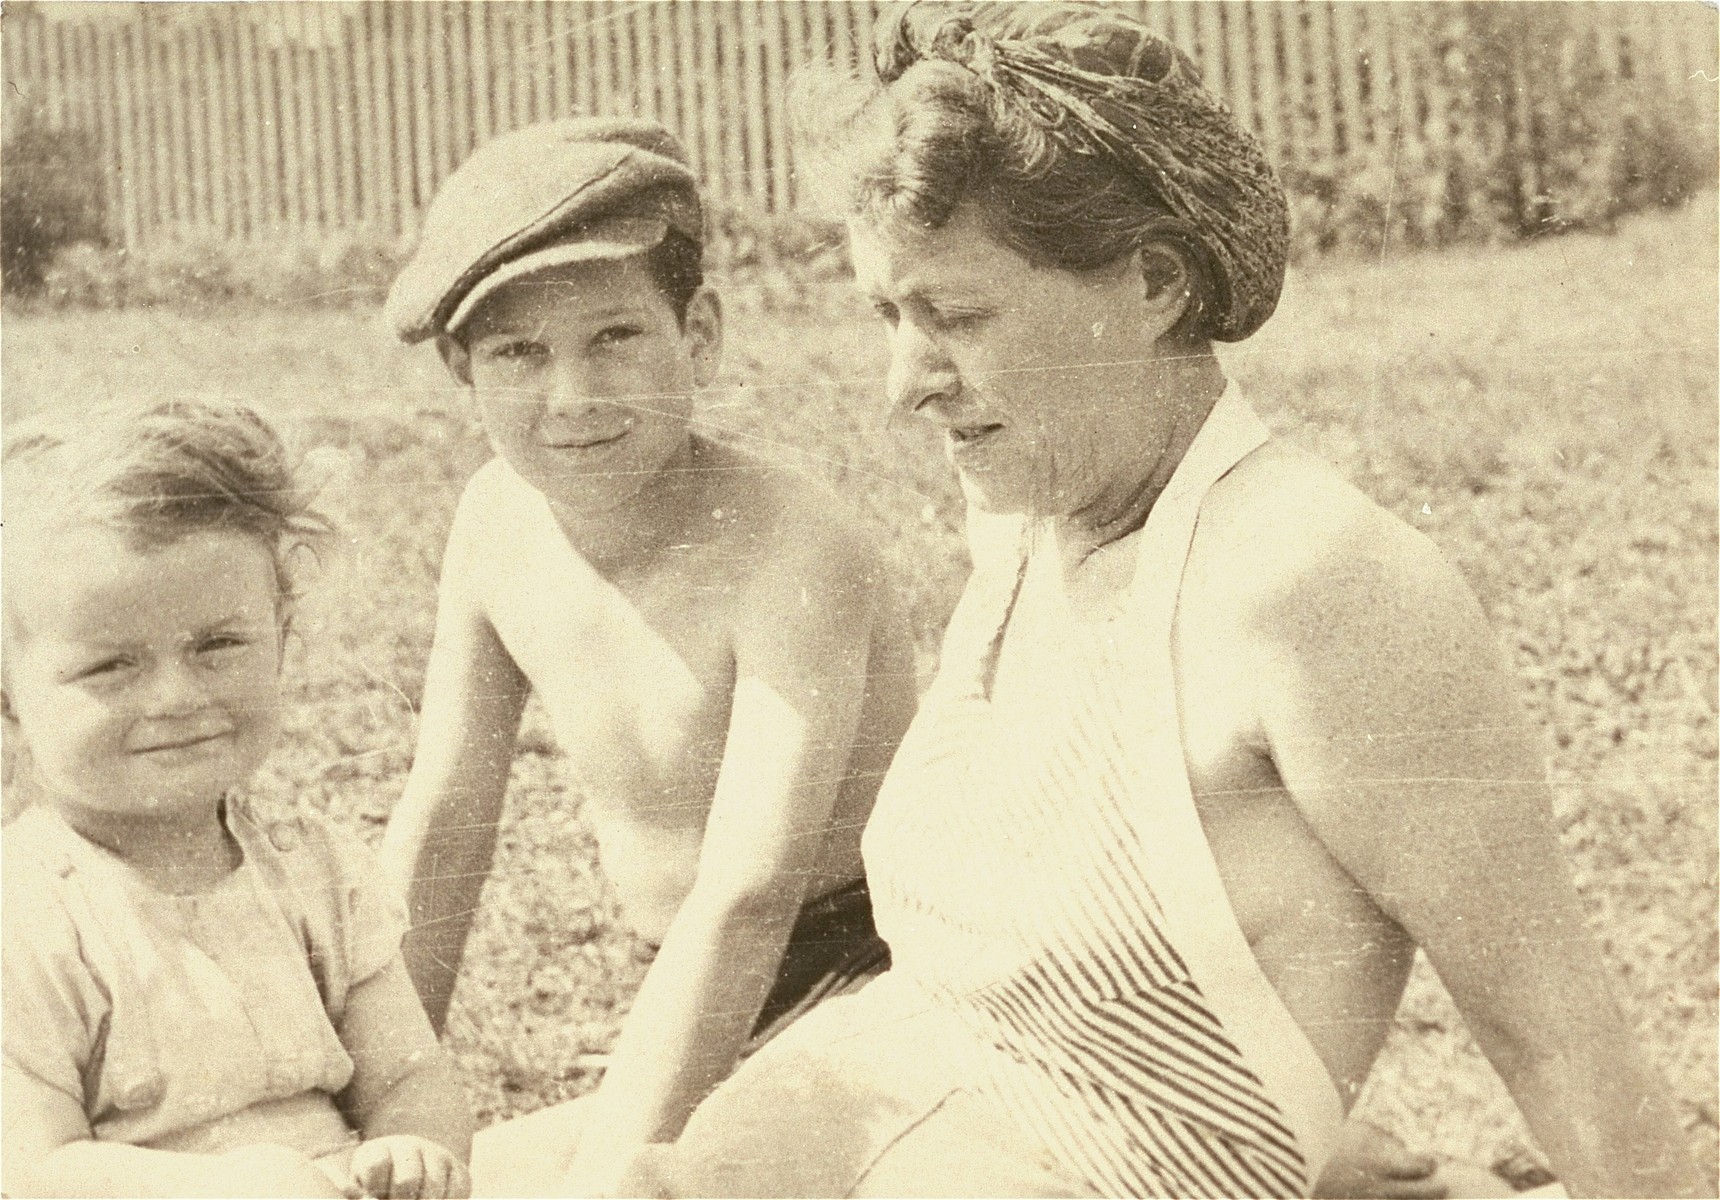 Janek Kon Konorski (center), a Jewish boy in hiding, enjoys a summer holiday with his rescuer, Maria Szelagowska Teski (right) and her daughter, Joanna.

The donor is the son of Maria Teski.